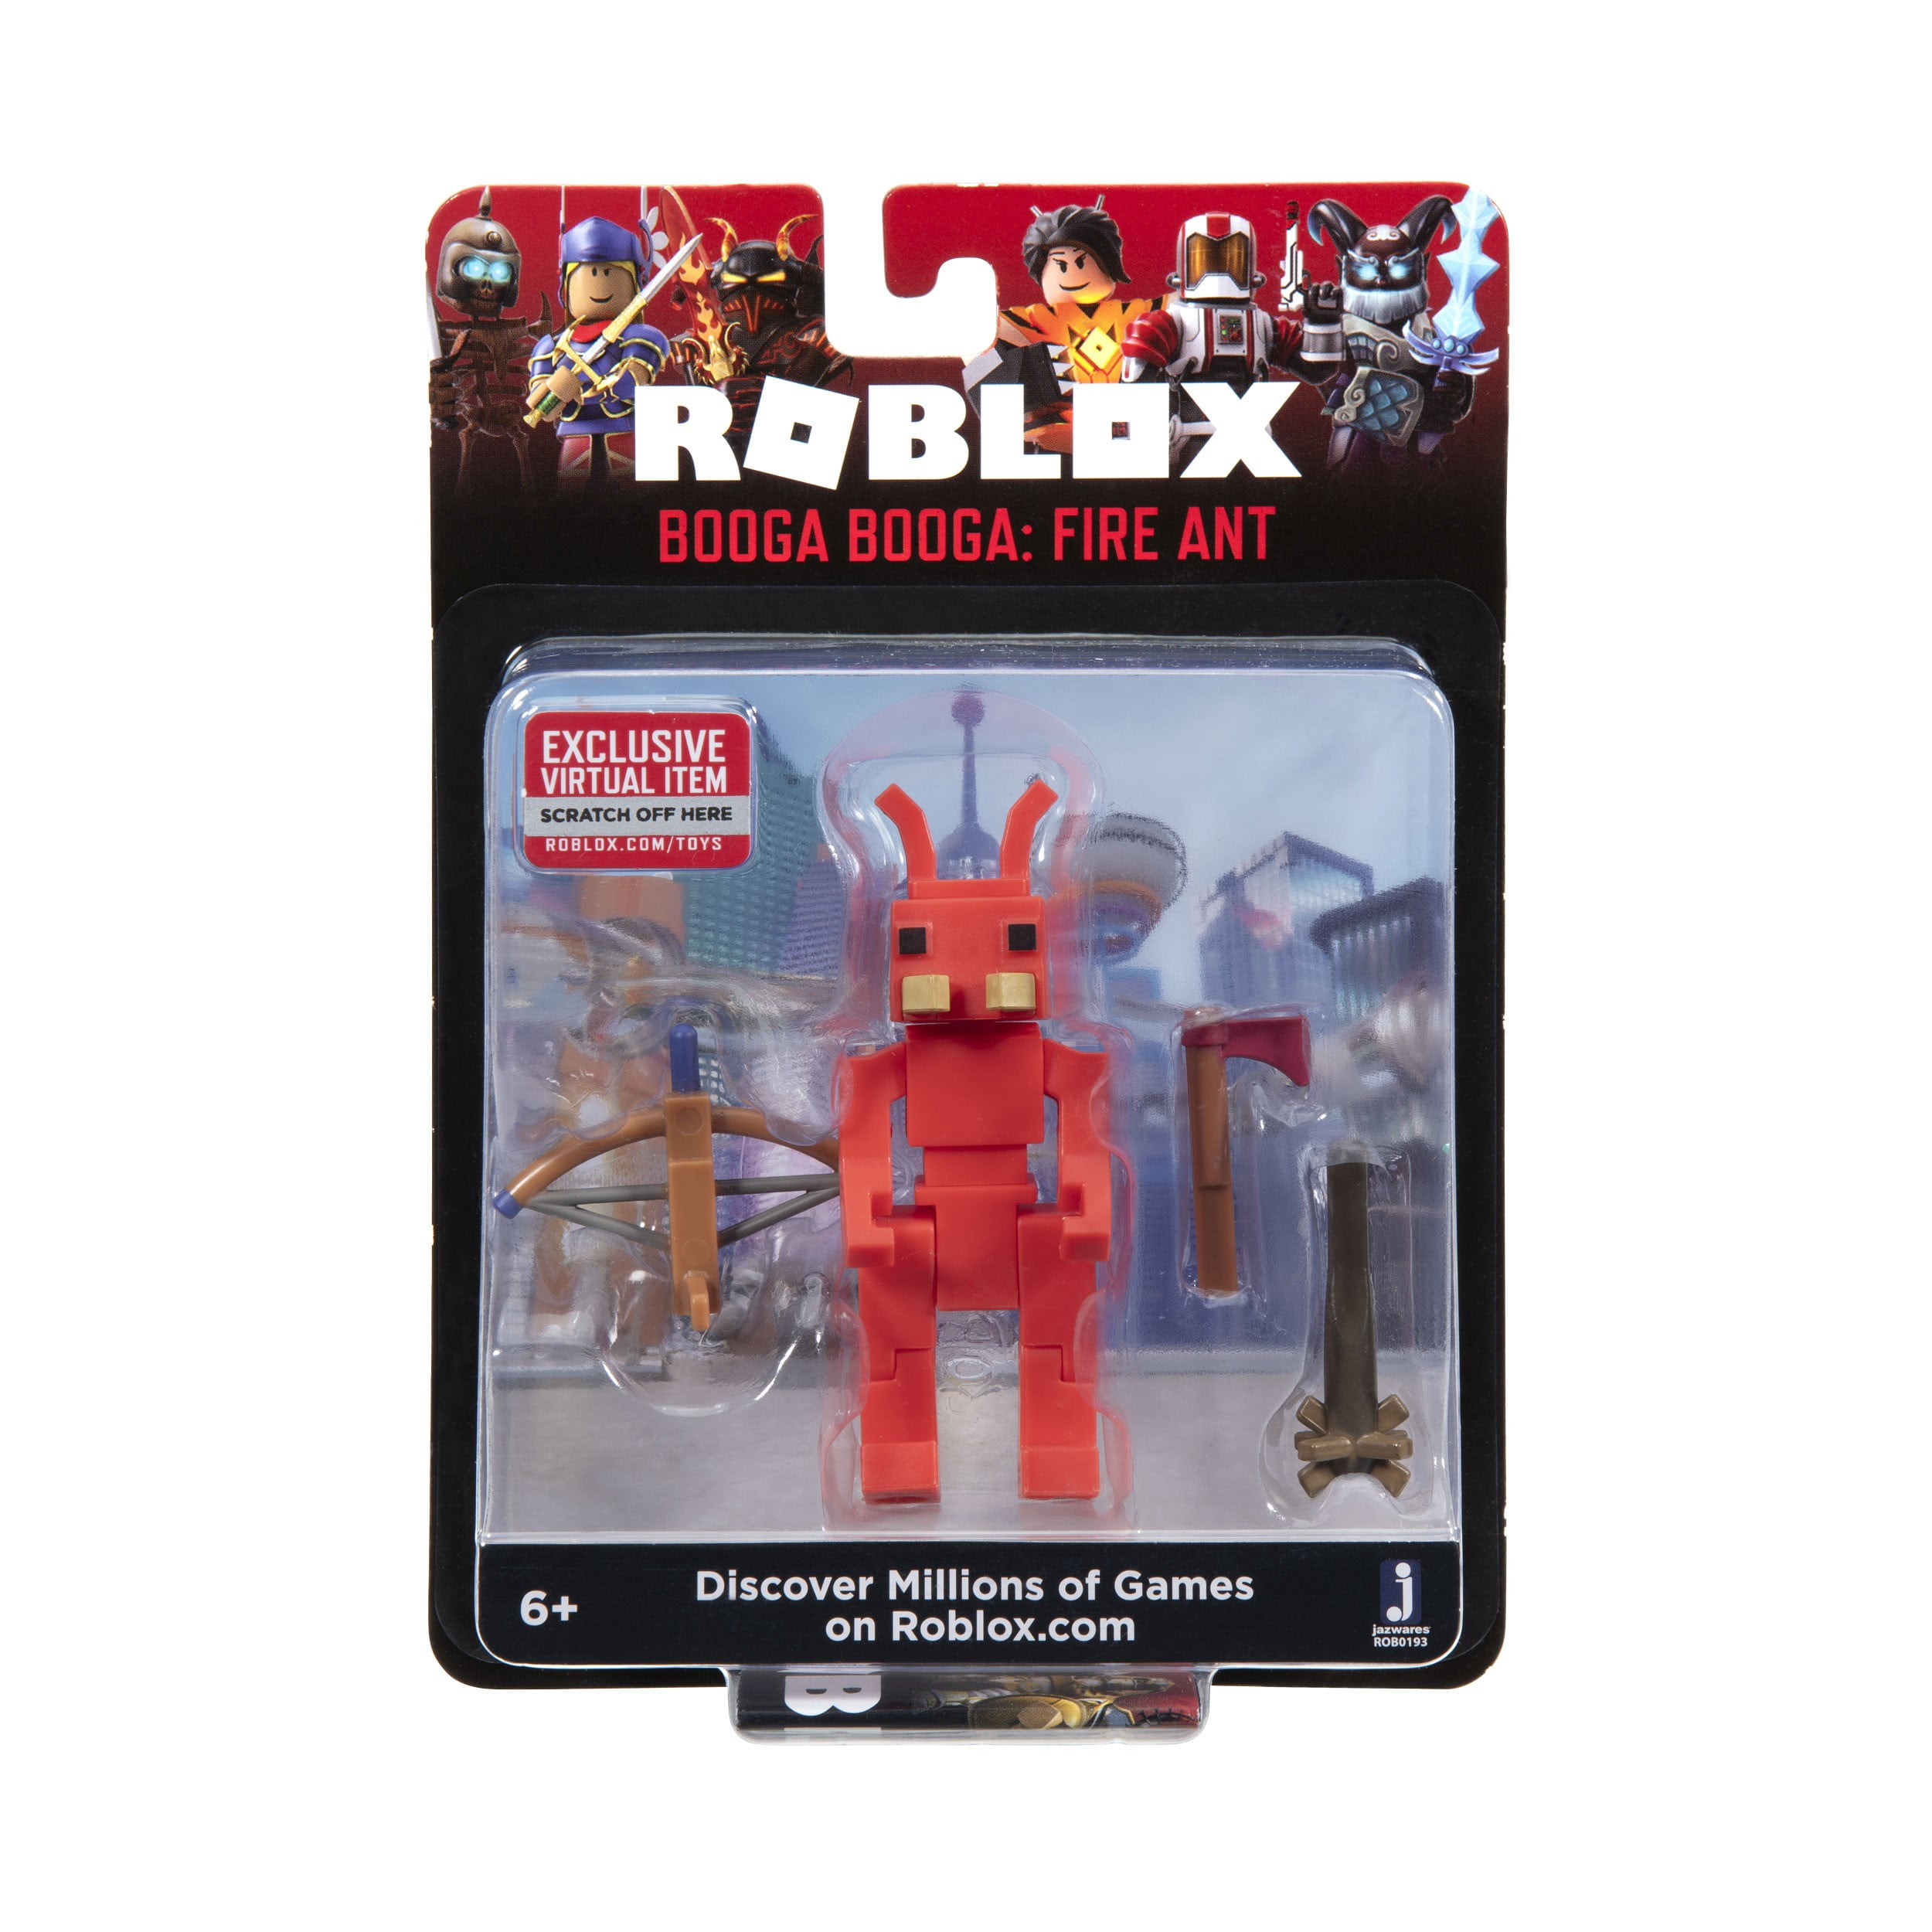 Roblox Booga Booga Fire Ant Action Figure Walmart Com Walmart Com - roblox how to go into action camera bike accessories must have